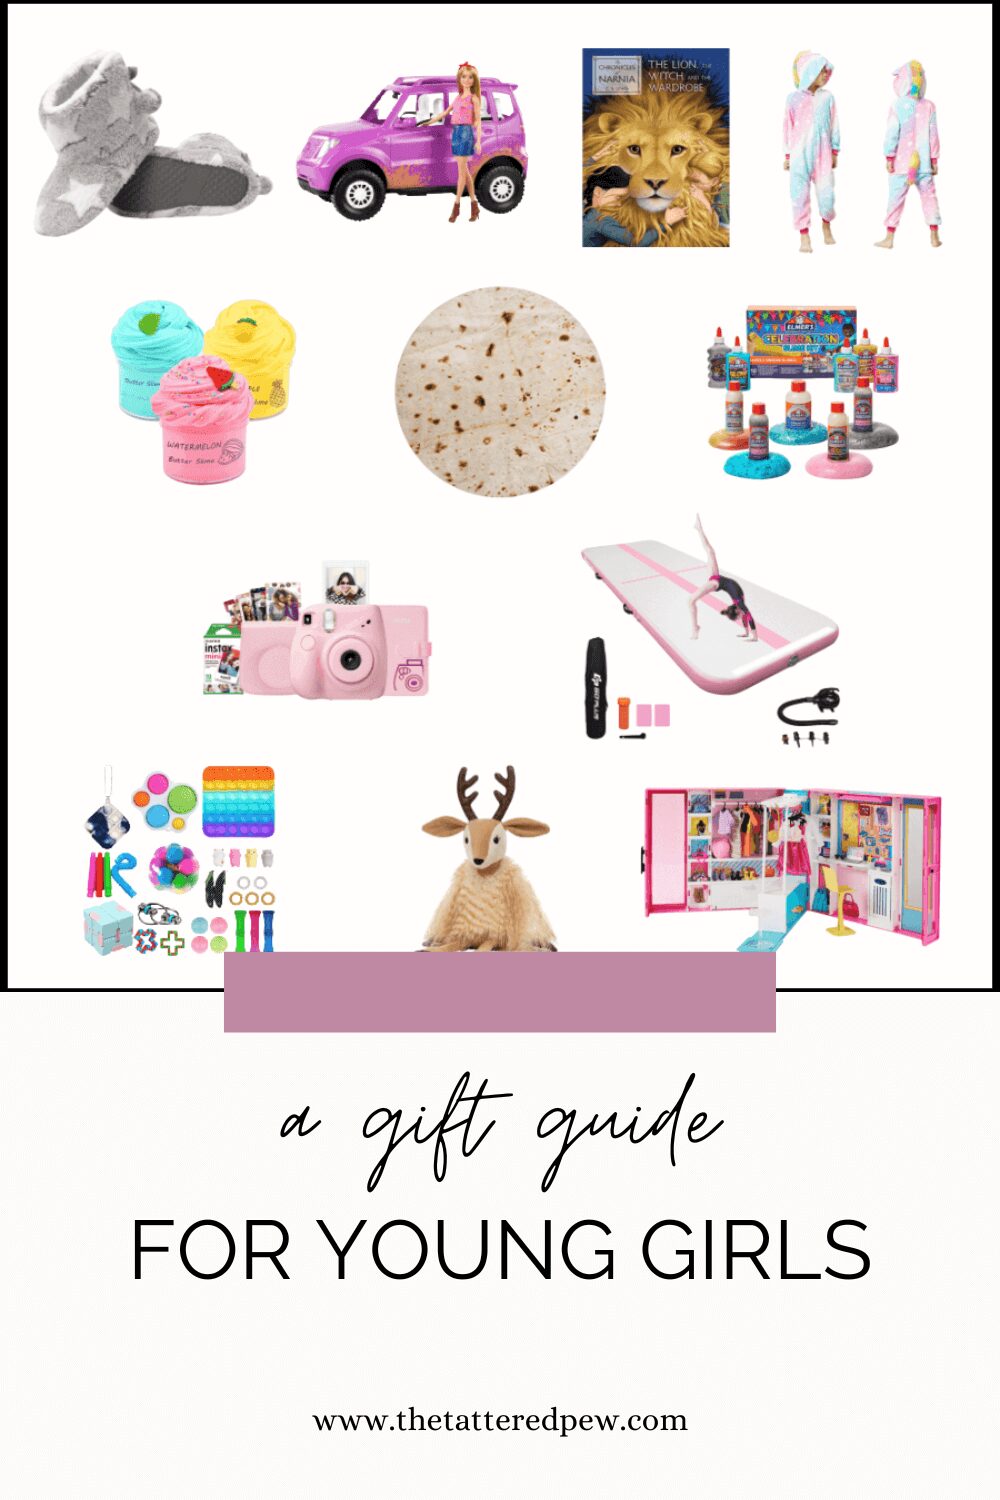 A gift guide for young girls